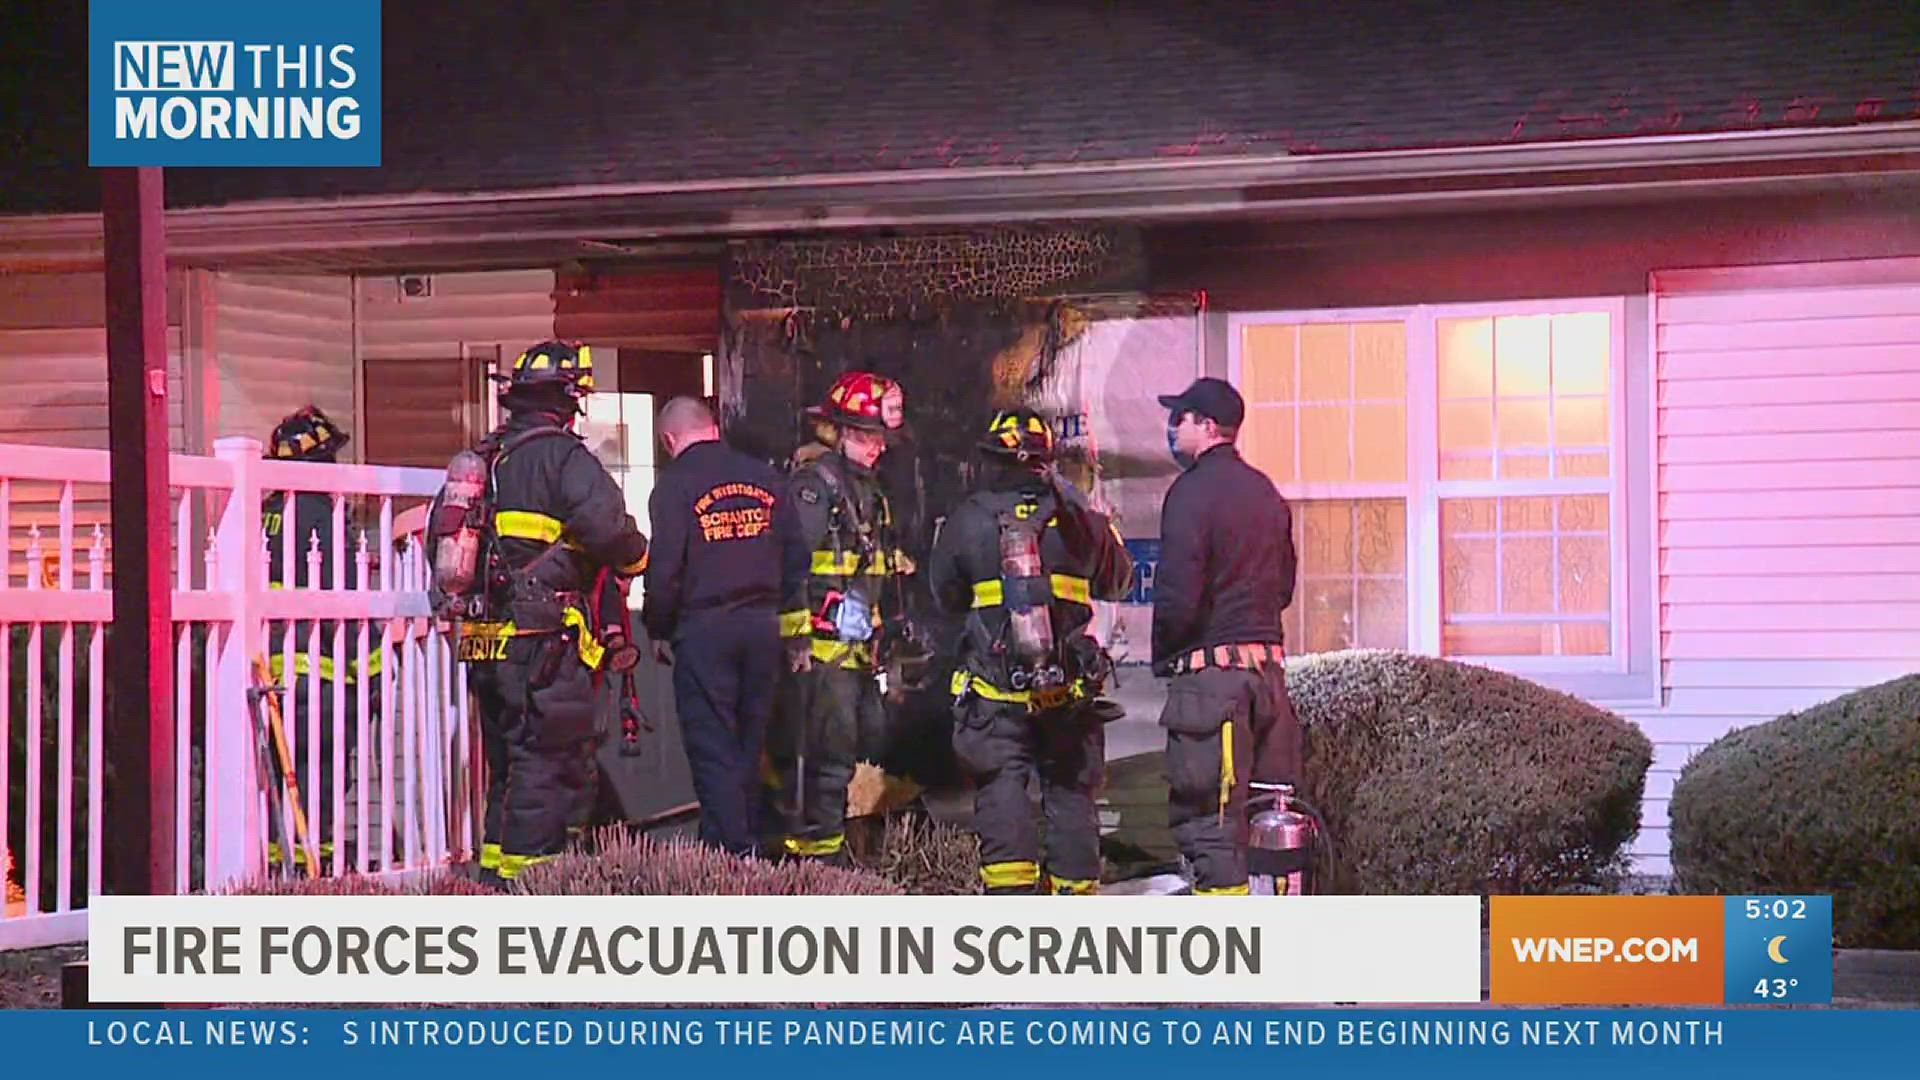 An early morning fire alarm forced residents at the Green Ridge Care Center from their homes.